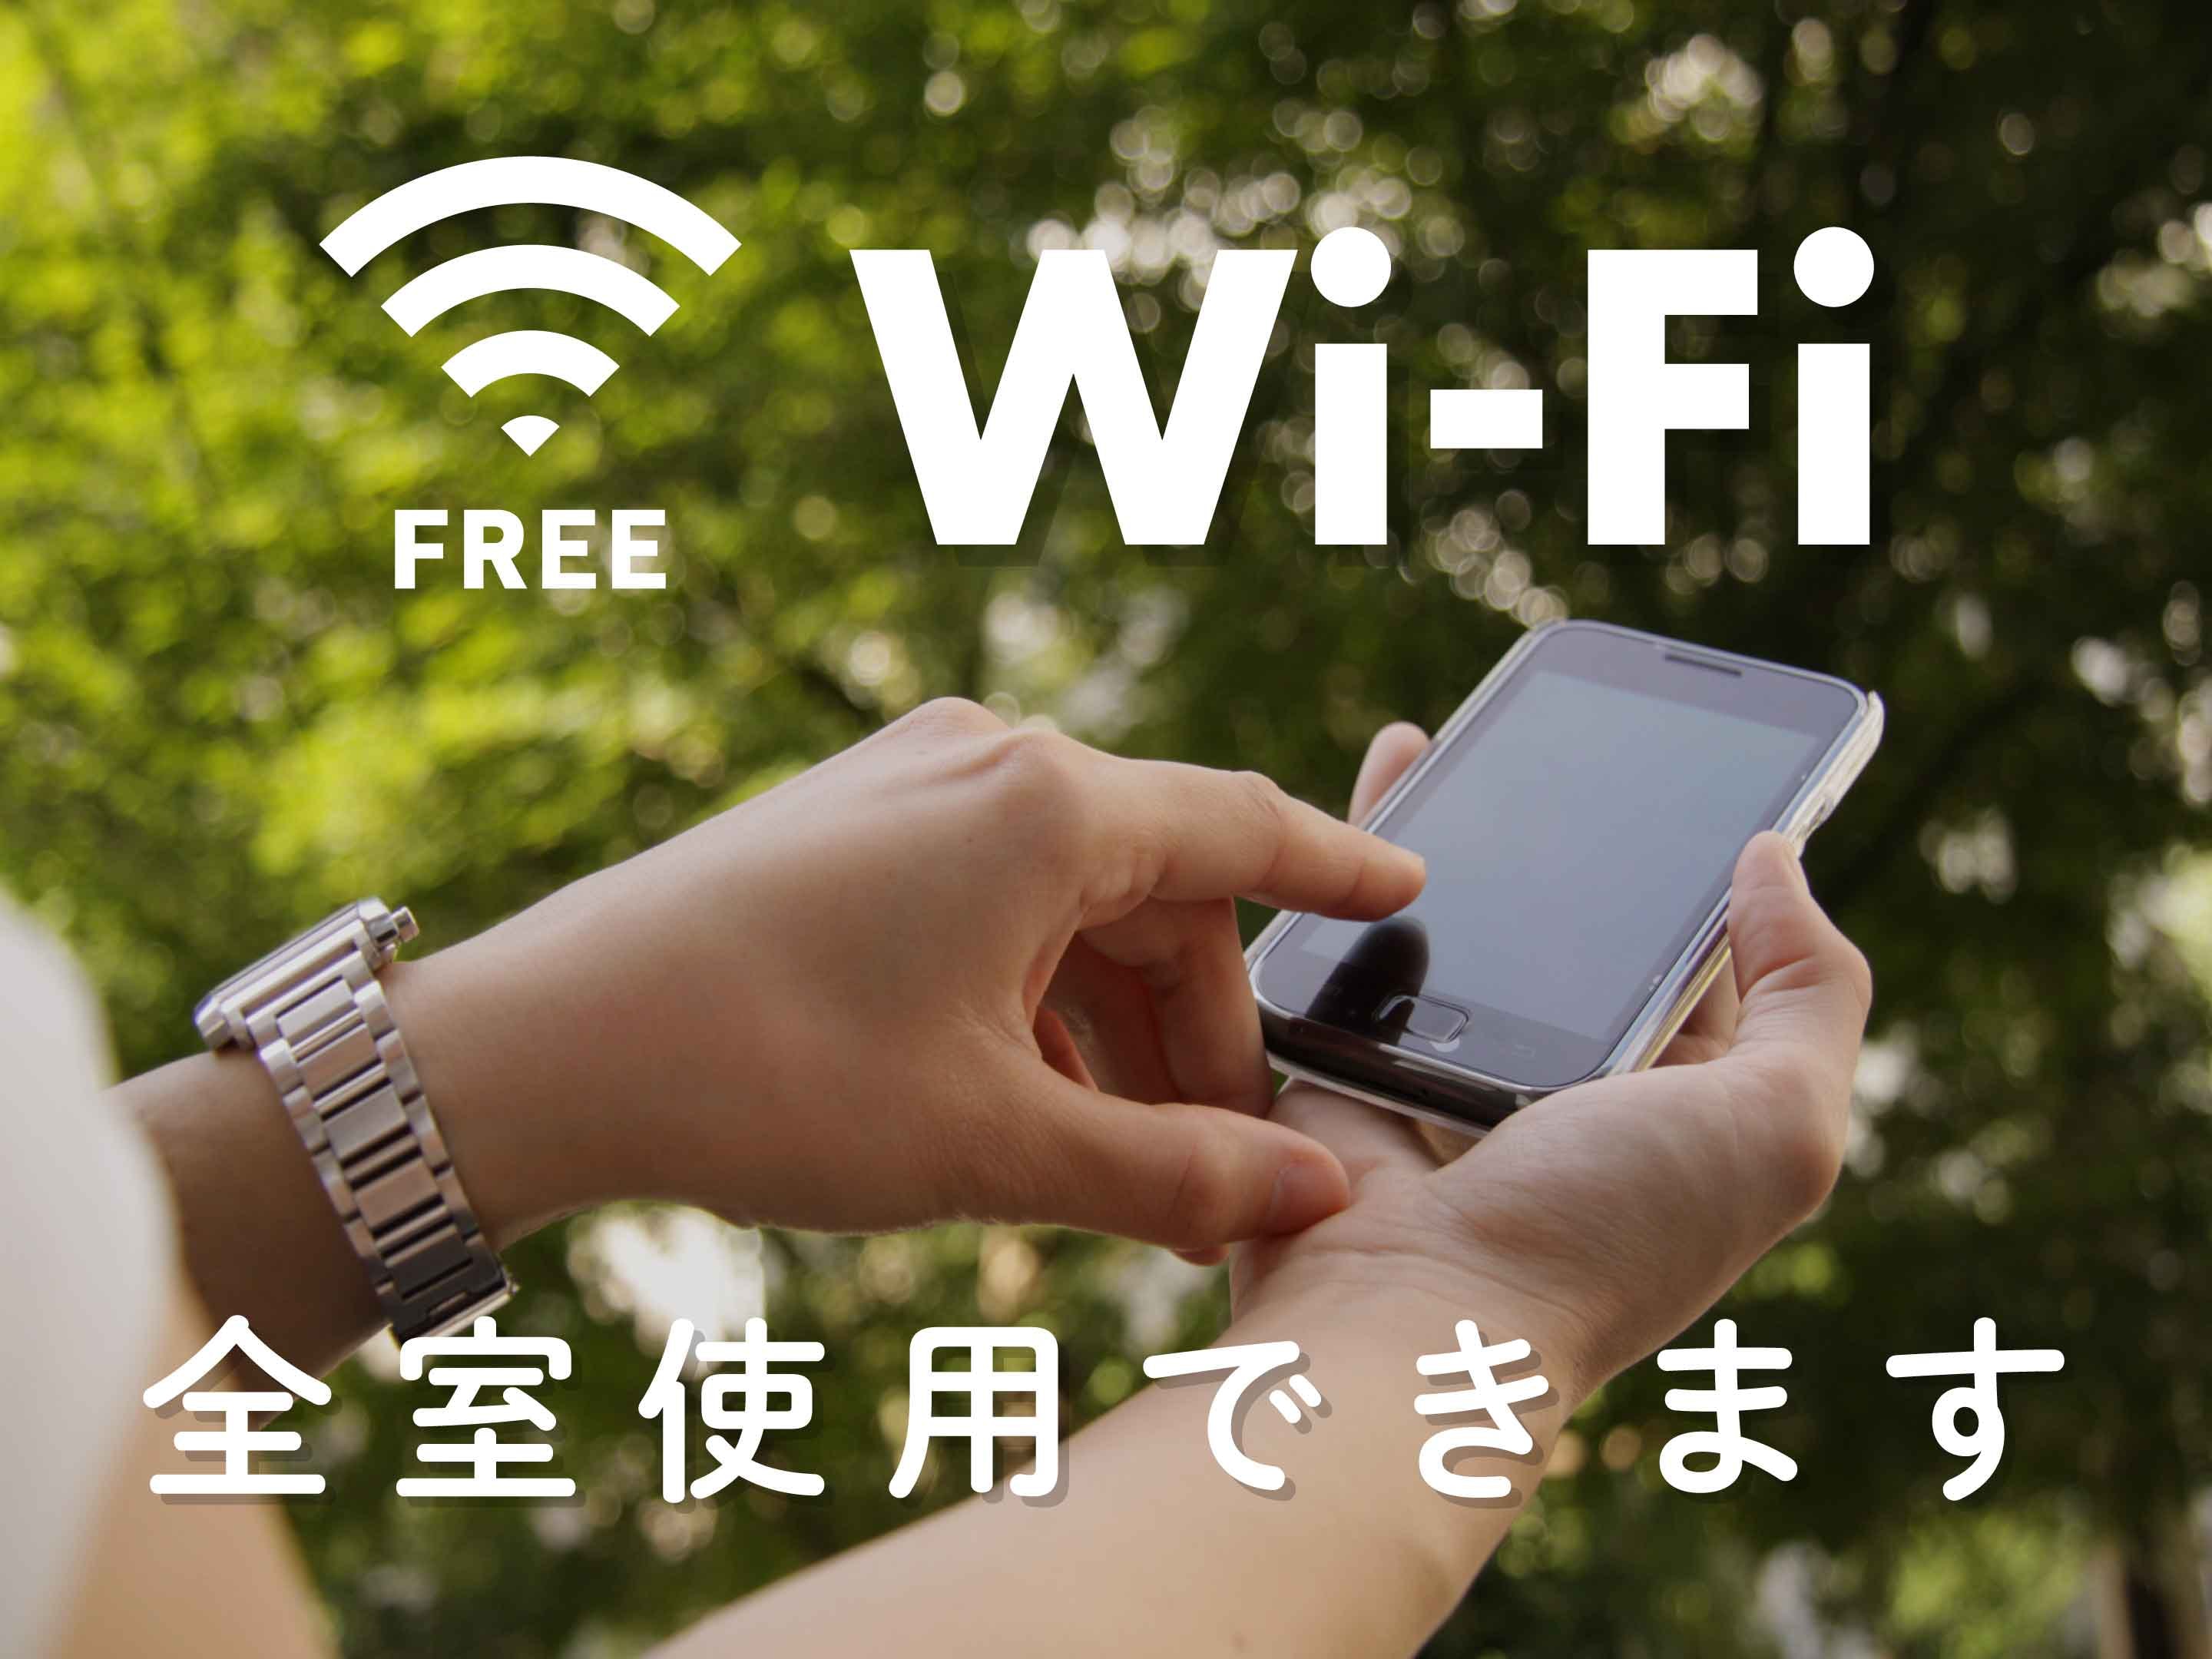 ● Wifi can be used in all rooms (free)